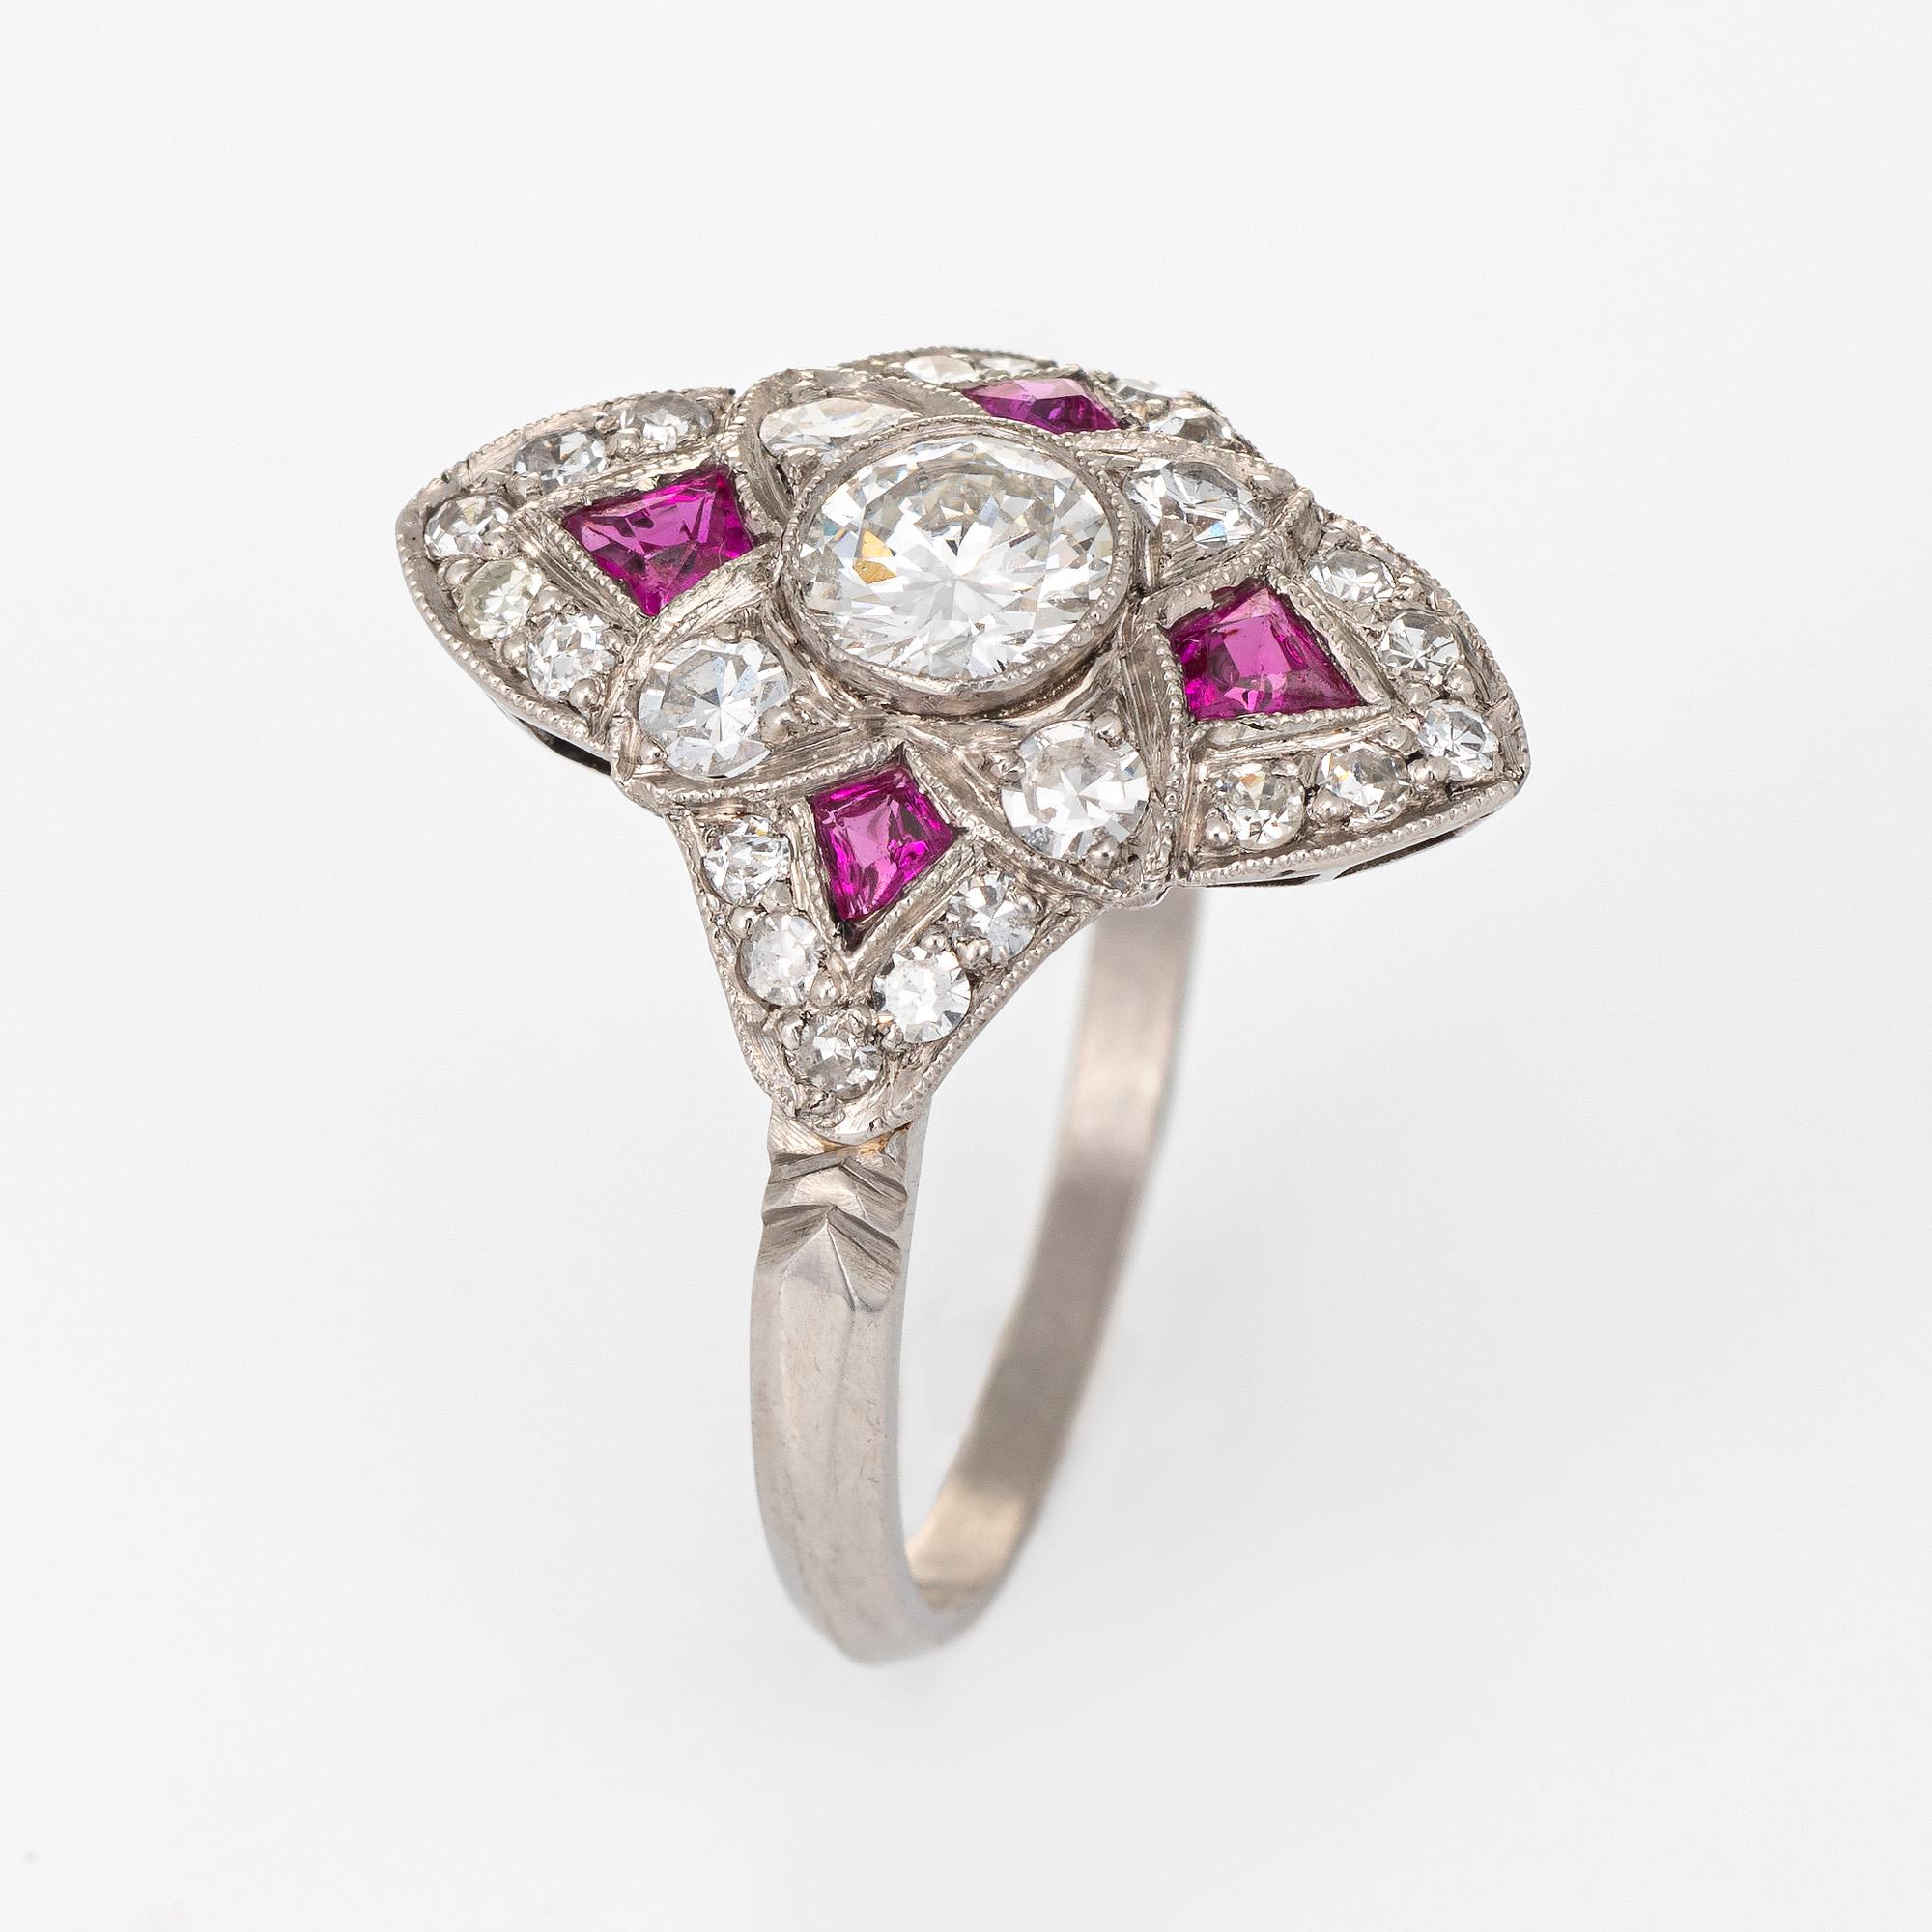 Elegant & finely detailed Art Deco era ring (circa 1920s to 1930s) crafted in 900 platinum. 

Centrally mounted estimated 0.50 carat transitional cut diamond is accented with a further 0.40 carats of diamonds (estimated at H-I color and VS2-SI1